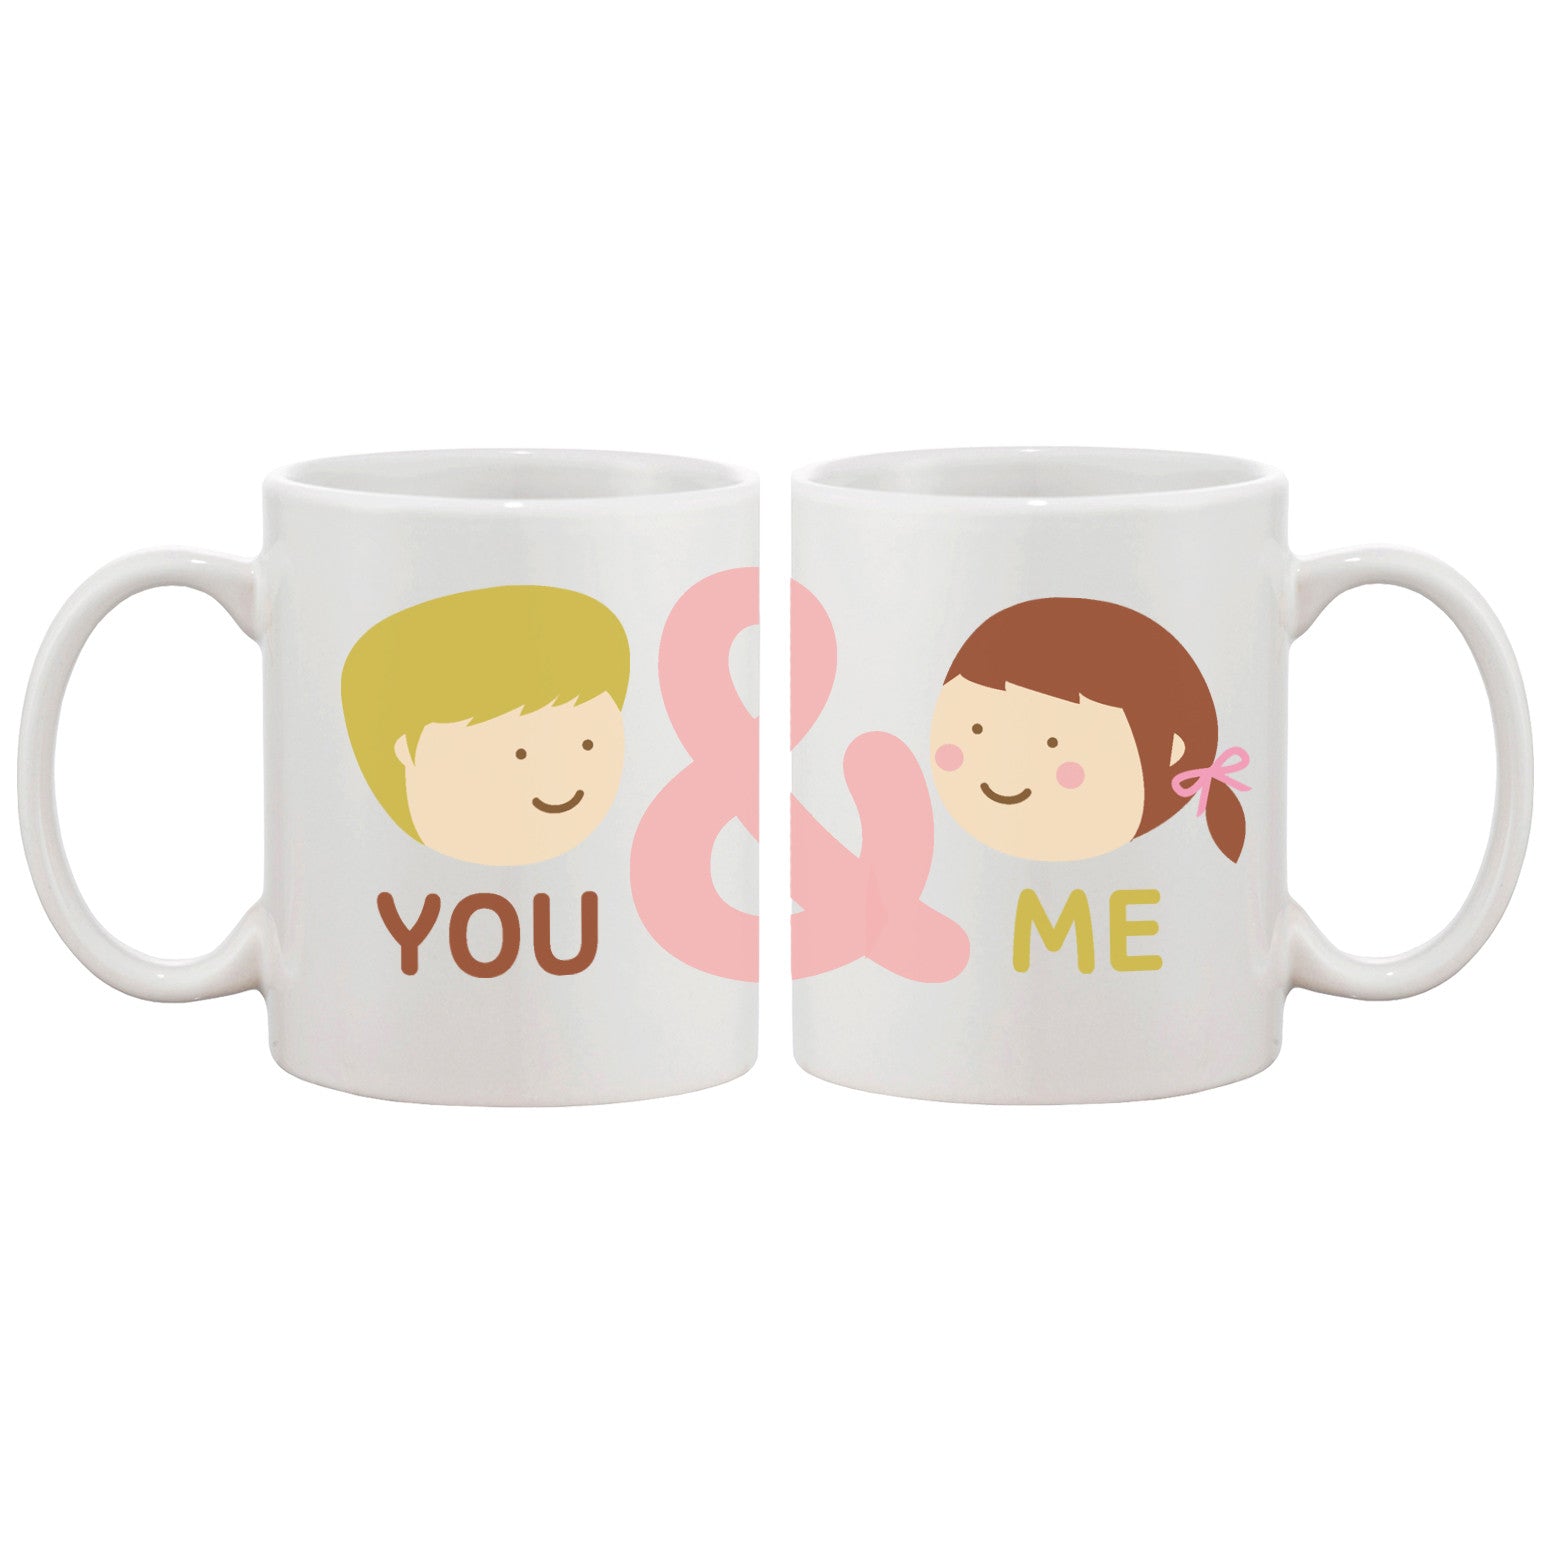 You And Me Matching Couple Mugs Cute Graphic Design Ceramic Coffee Mug Cup